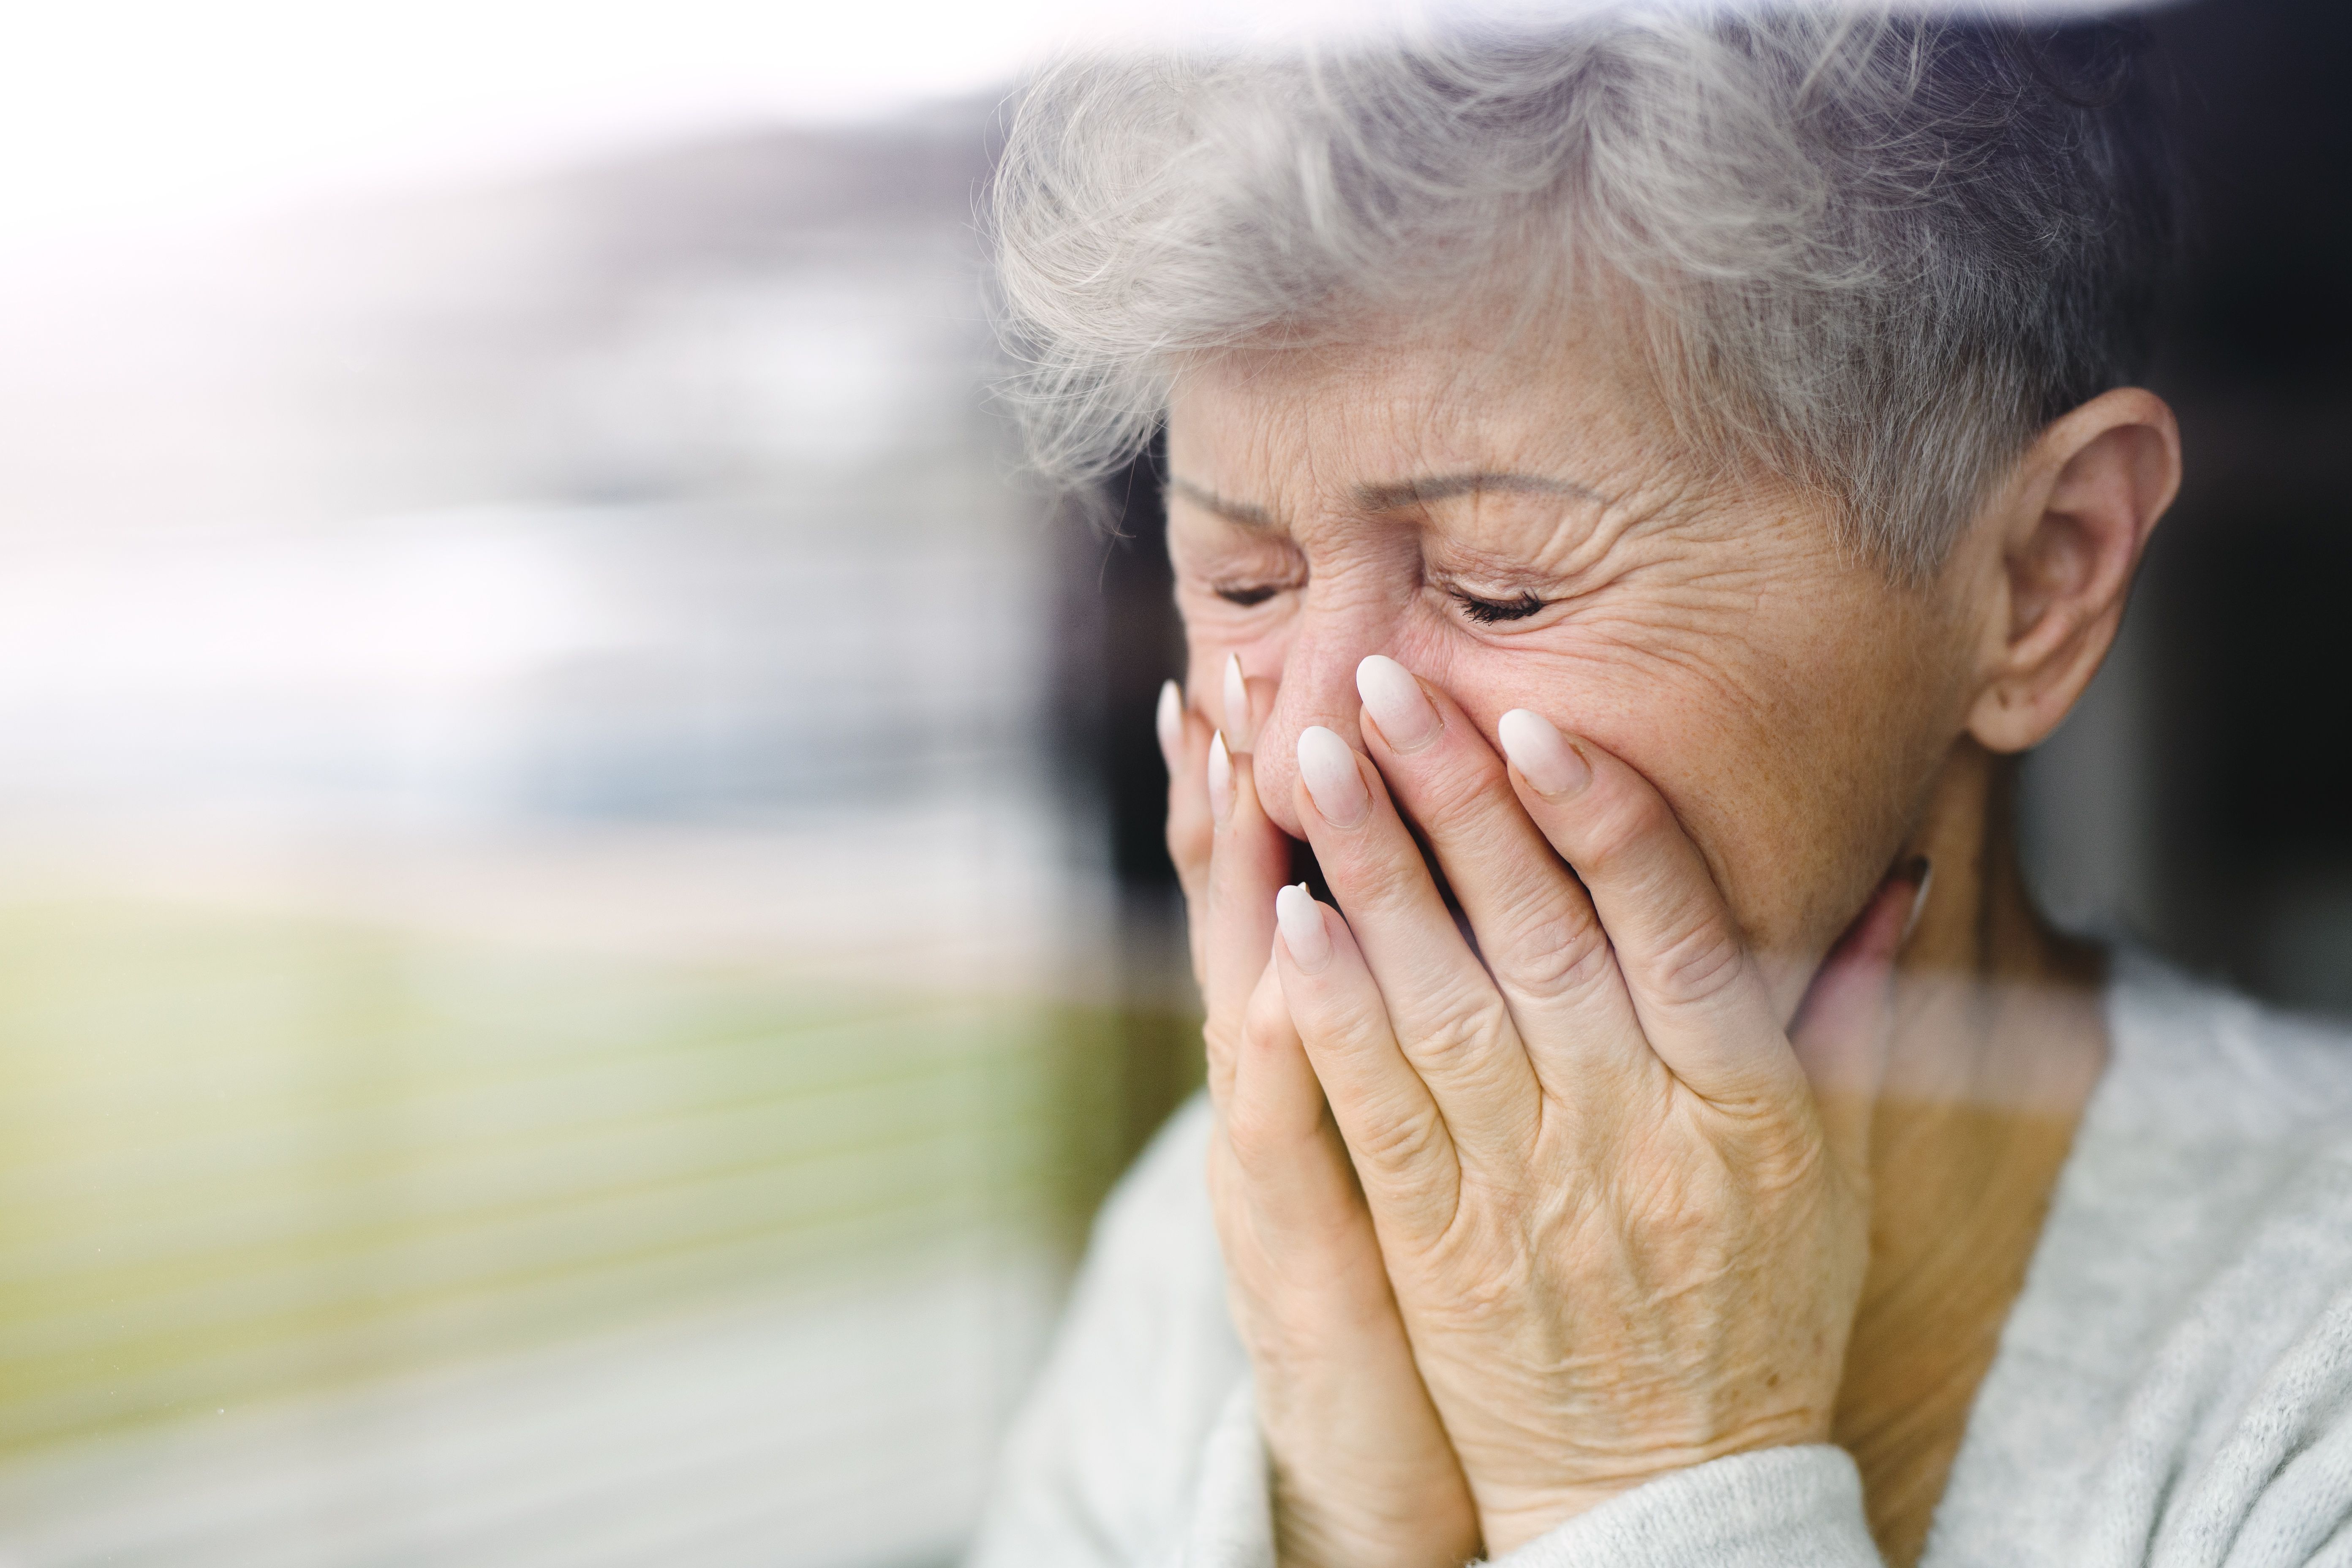 A crying senior woman | Source: Getty Images